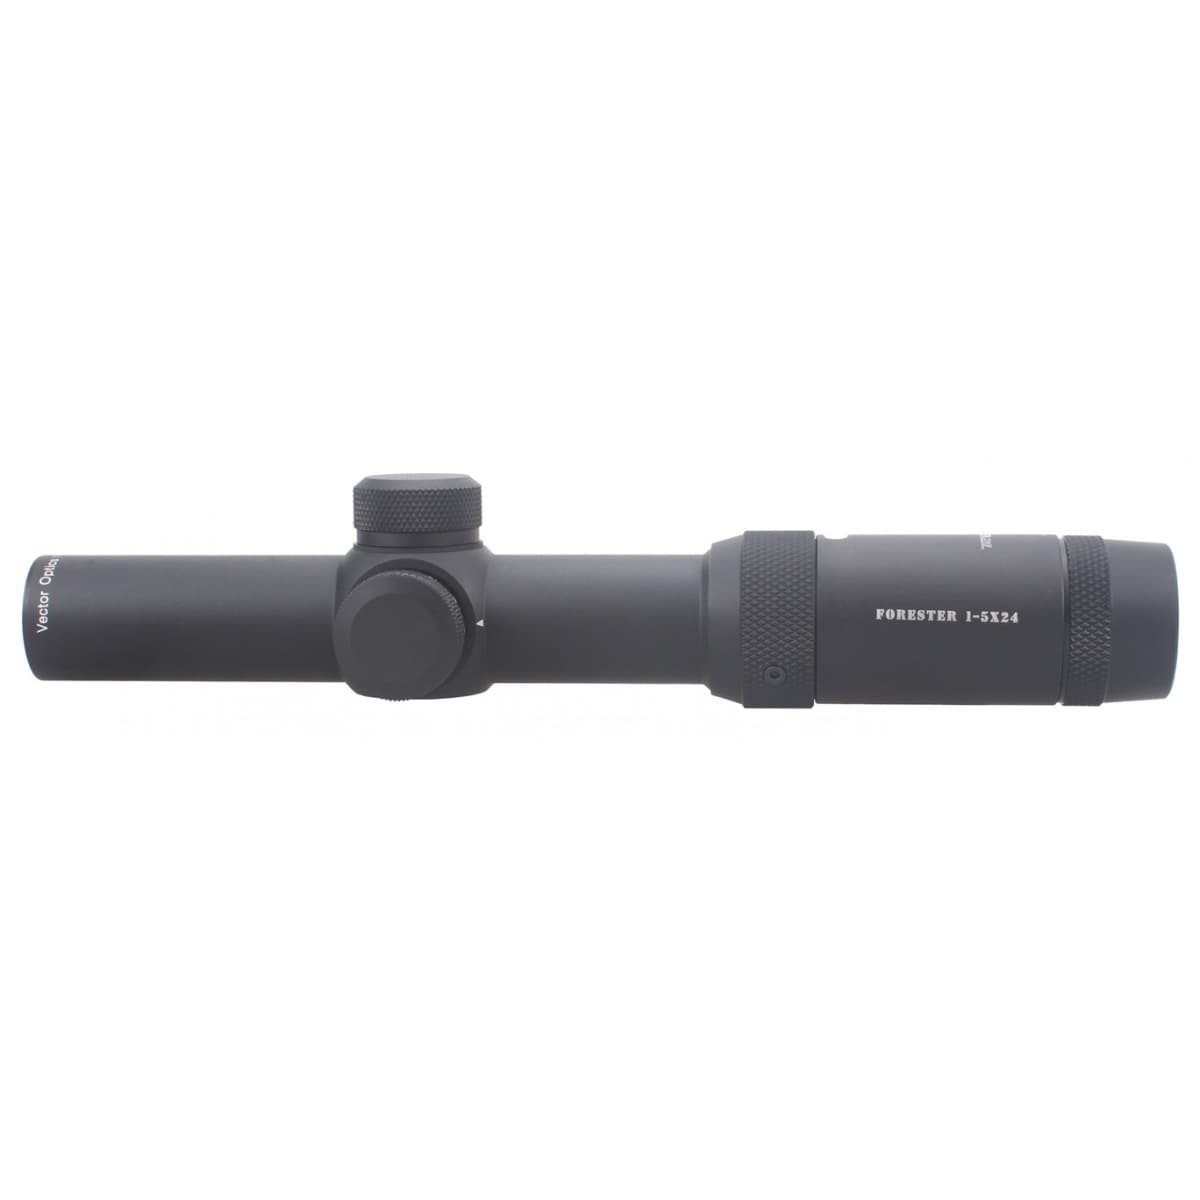 Vector Optics Forester 1-5x24mm Rifle Scope | Up to 34% Off 5 Star 